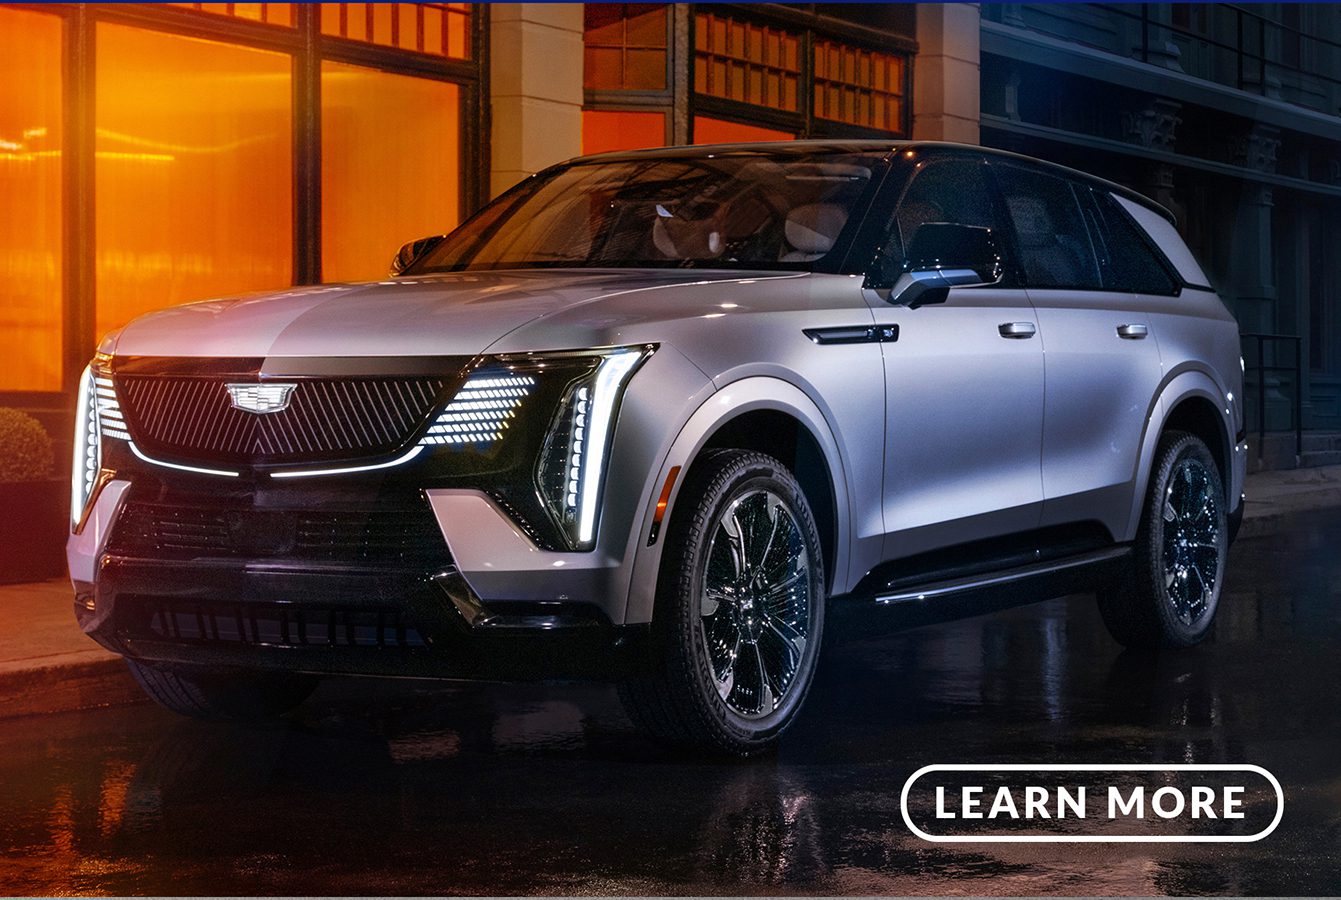 The 2020 cadillac xt5 suv is parked on a street at night.